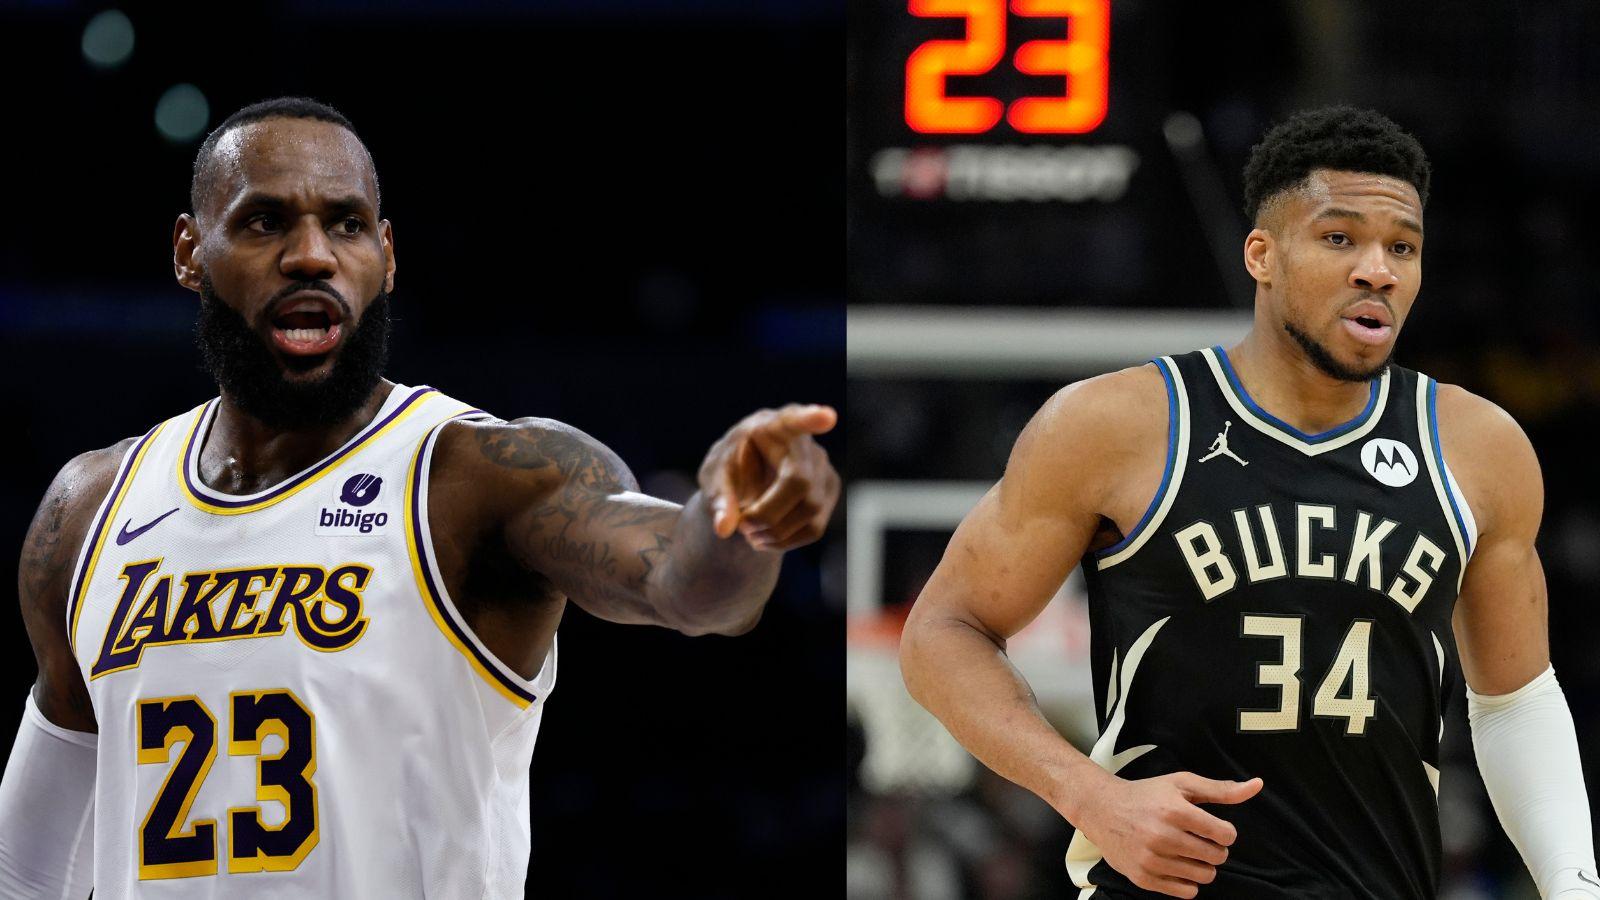 LeBron James as a member of the Los Angeles Lakers (left) and Giannis Antetokounmpo as a member of the Milwaukee Bucks (right).